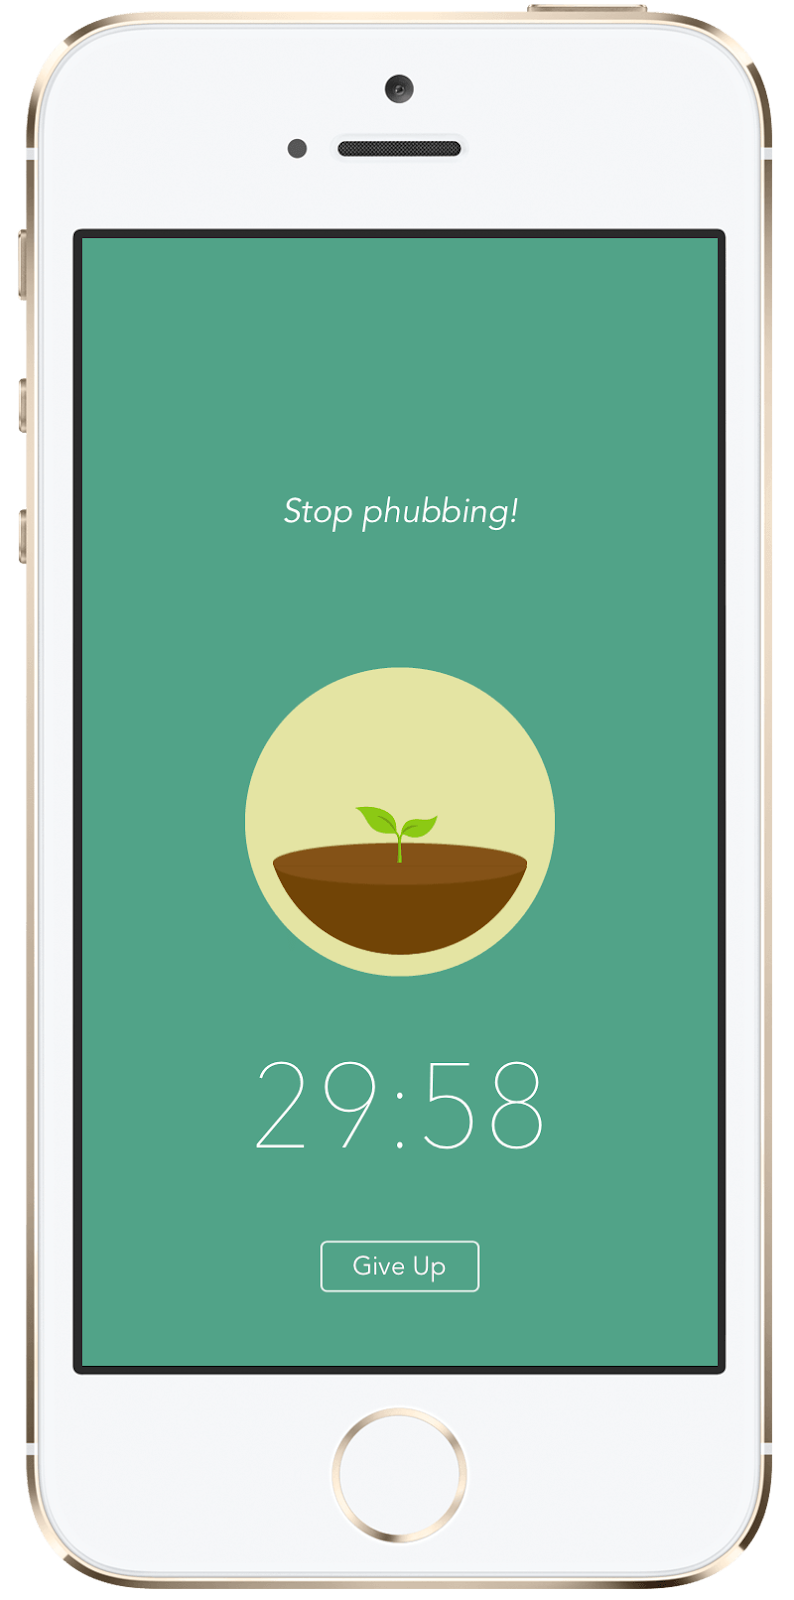 10 Apps That Help You Live More Sustainably